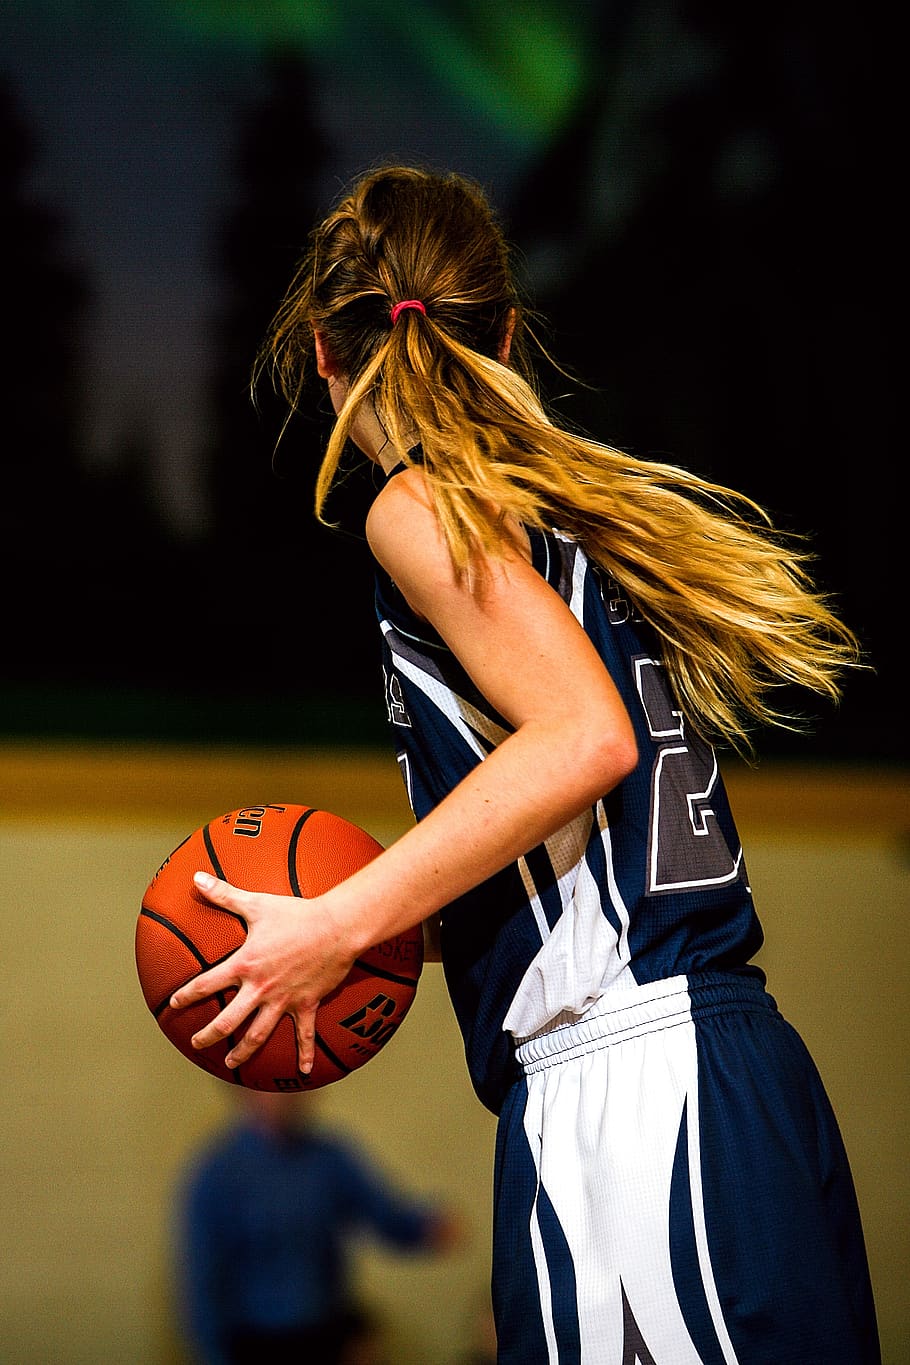 Woman in Blue and White Basketball Jersey Holding Brown Basketball, HD wallpaper